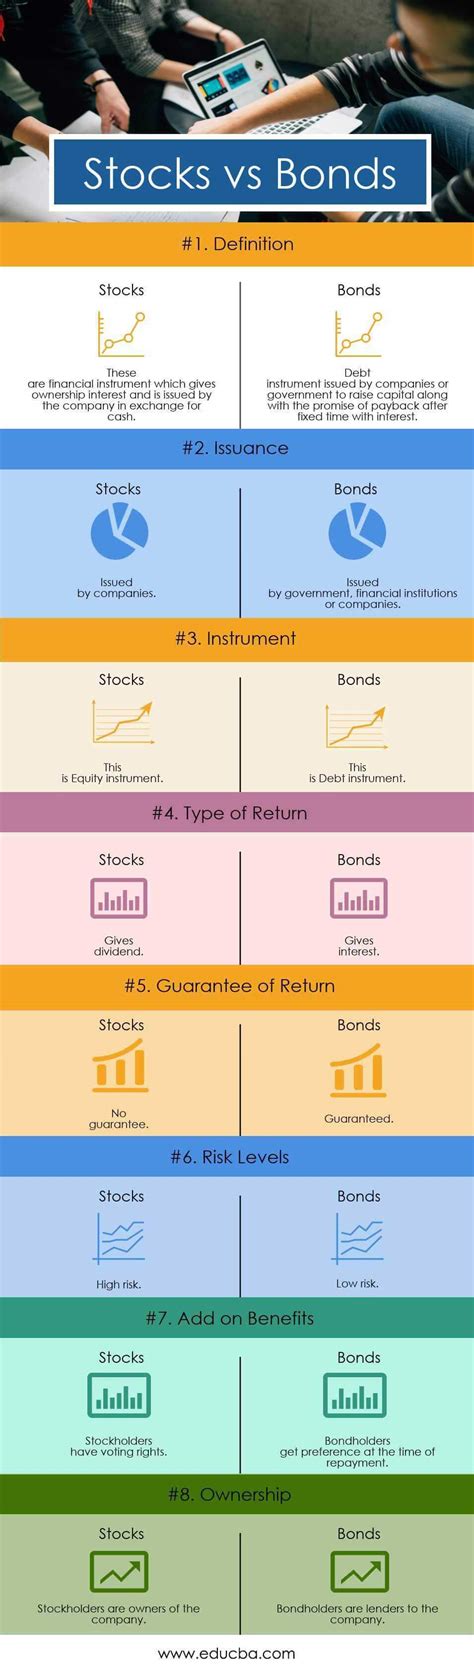 Stocks Vs Bonds Top 8 Differences You Should Know With Infographics